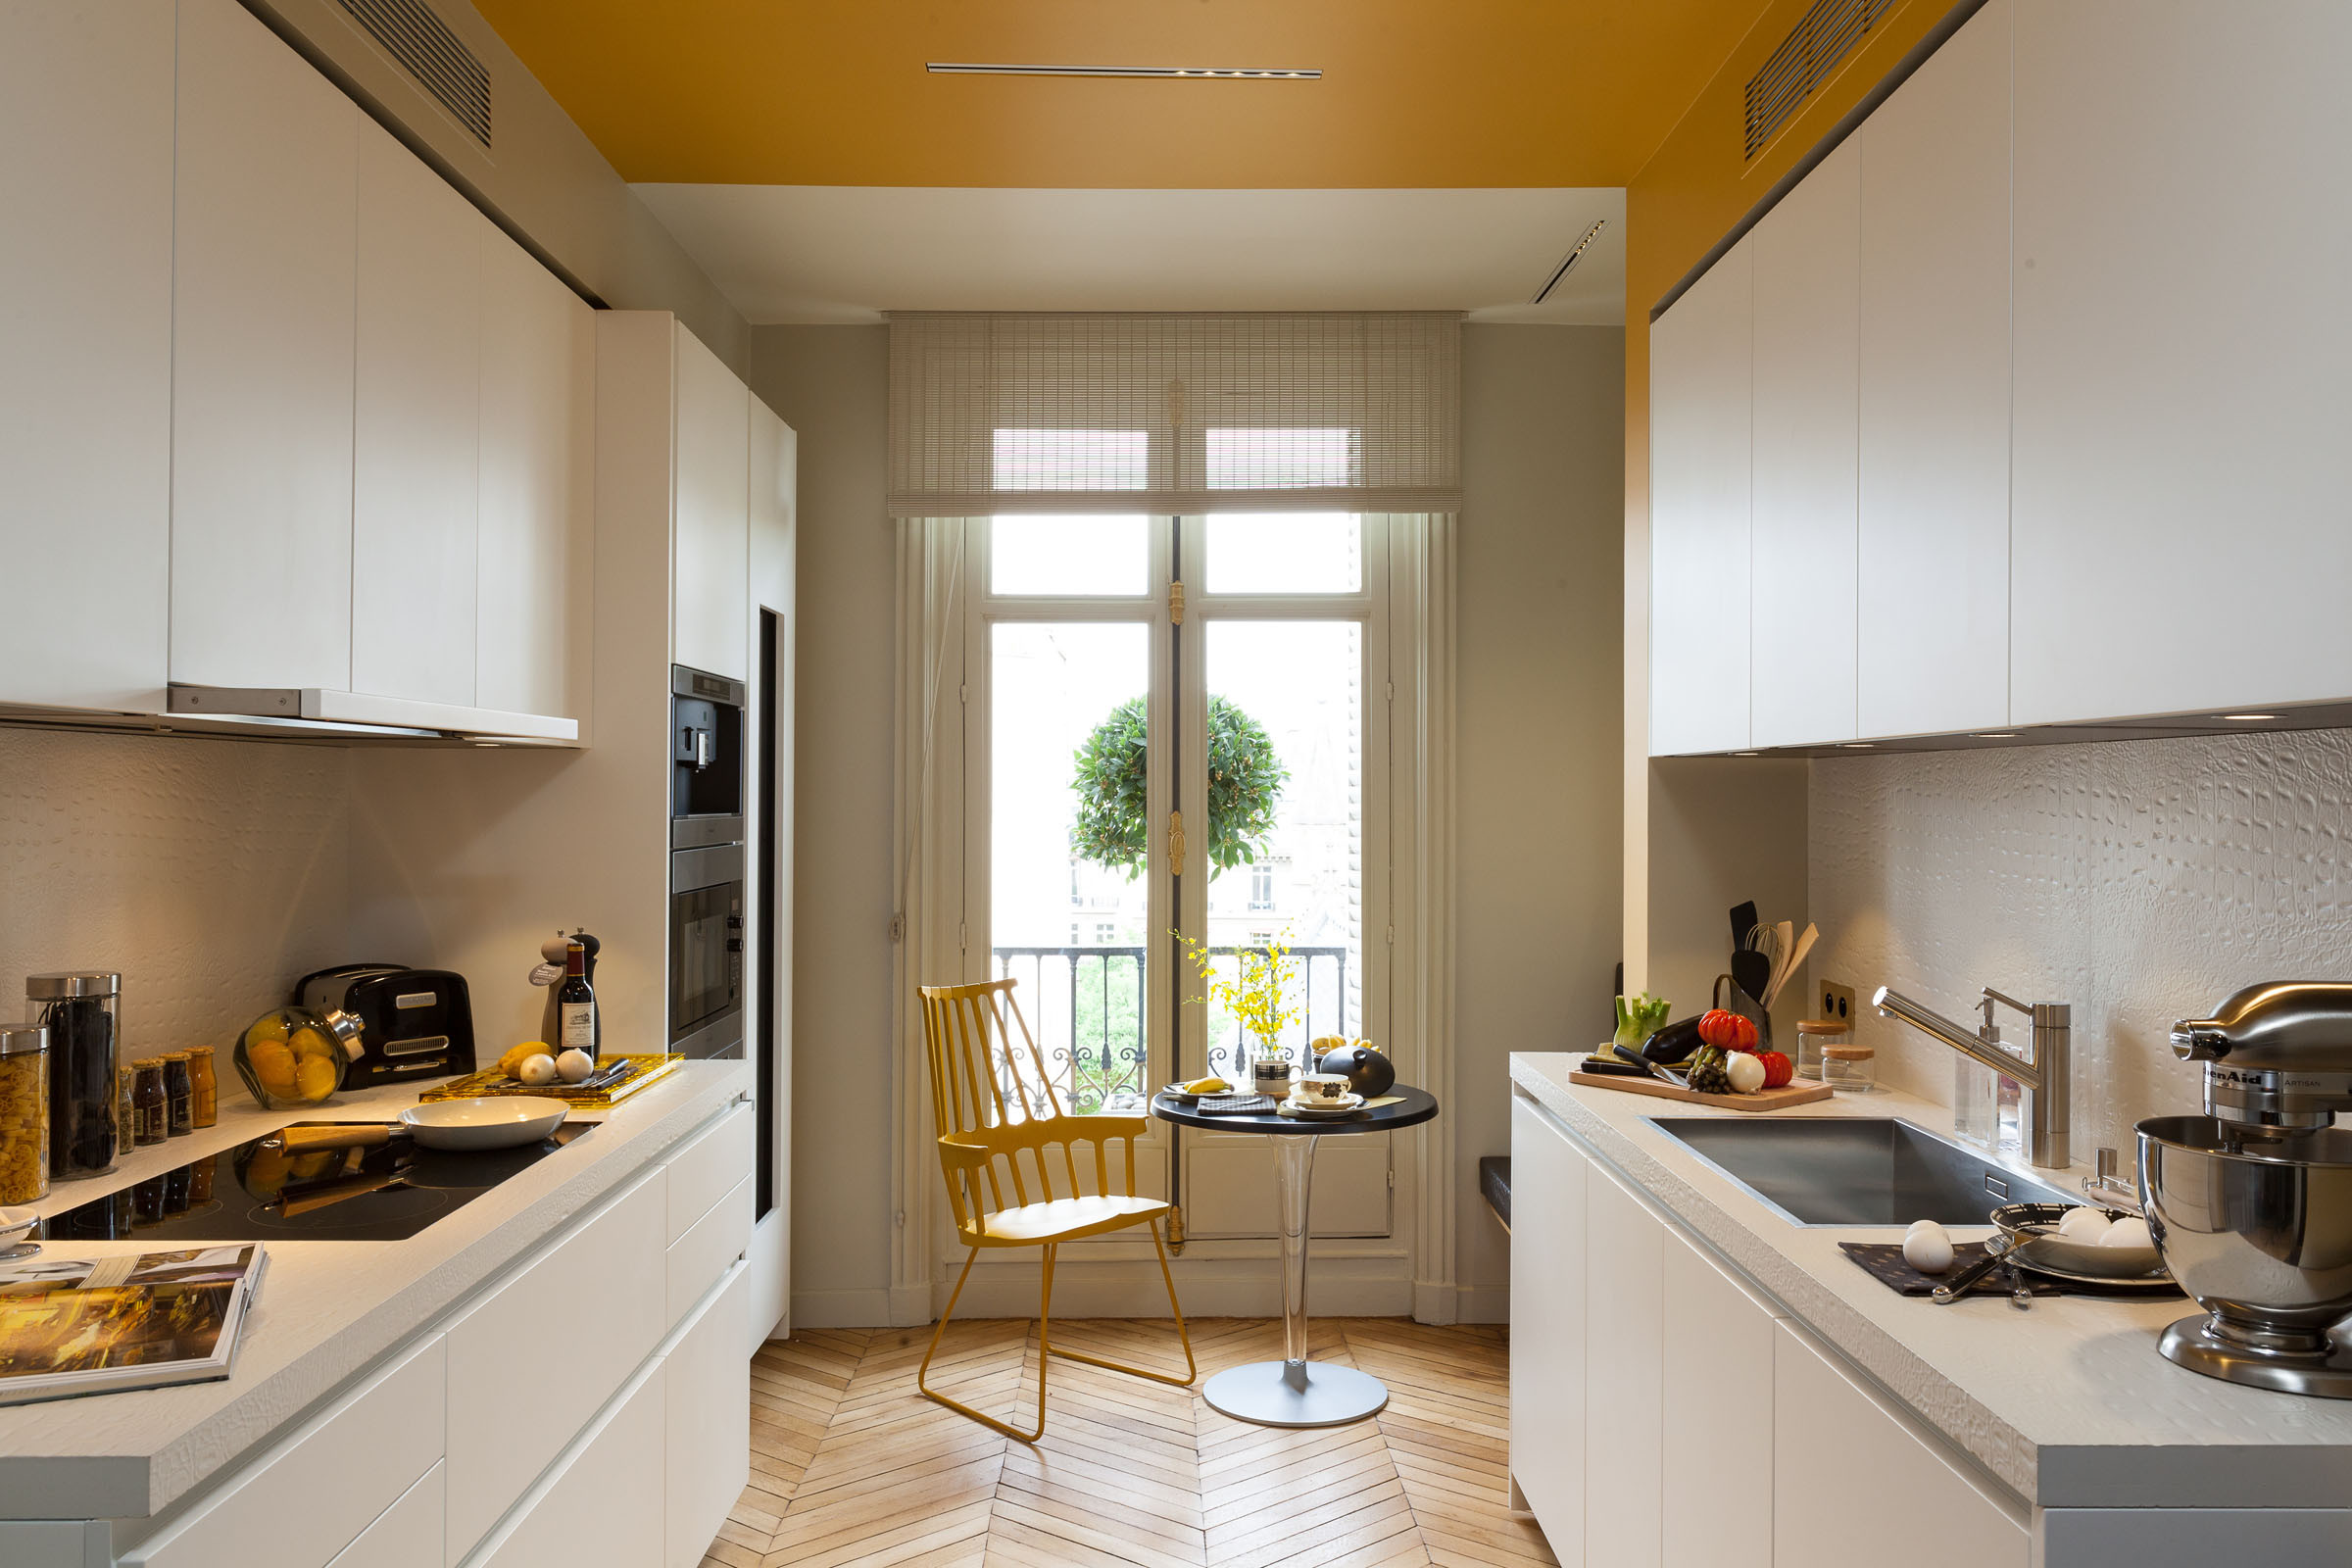 20 Ingenious Ideas to Steal for Your Small Kitchen   Houzz UK